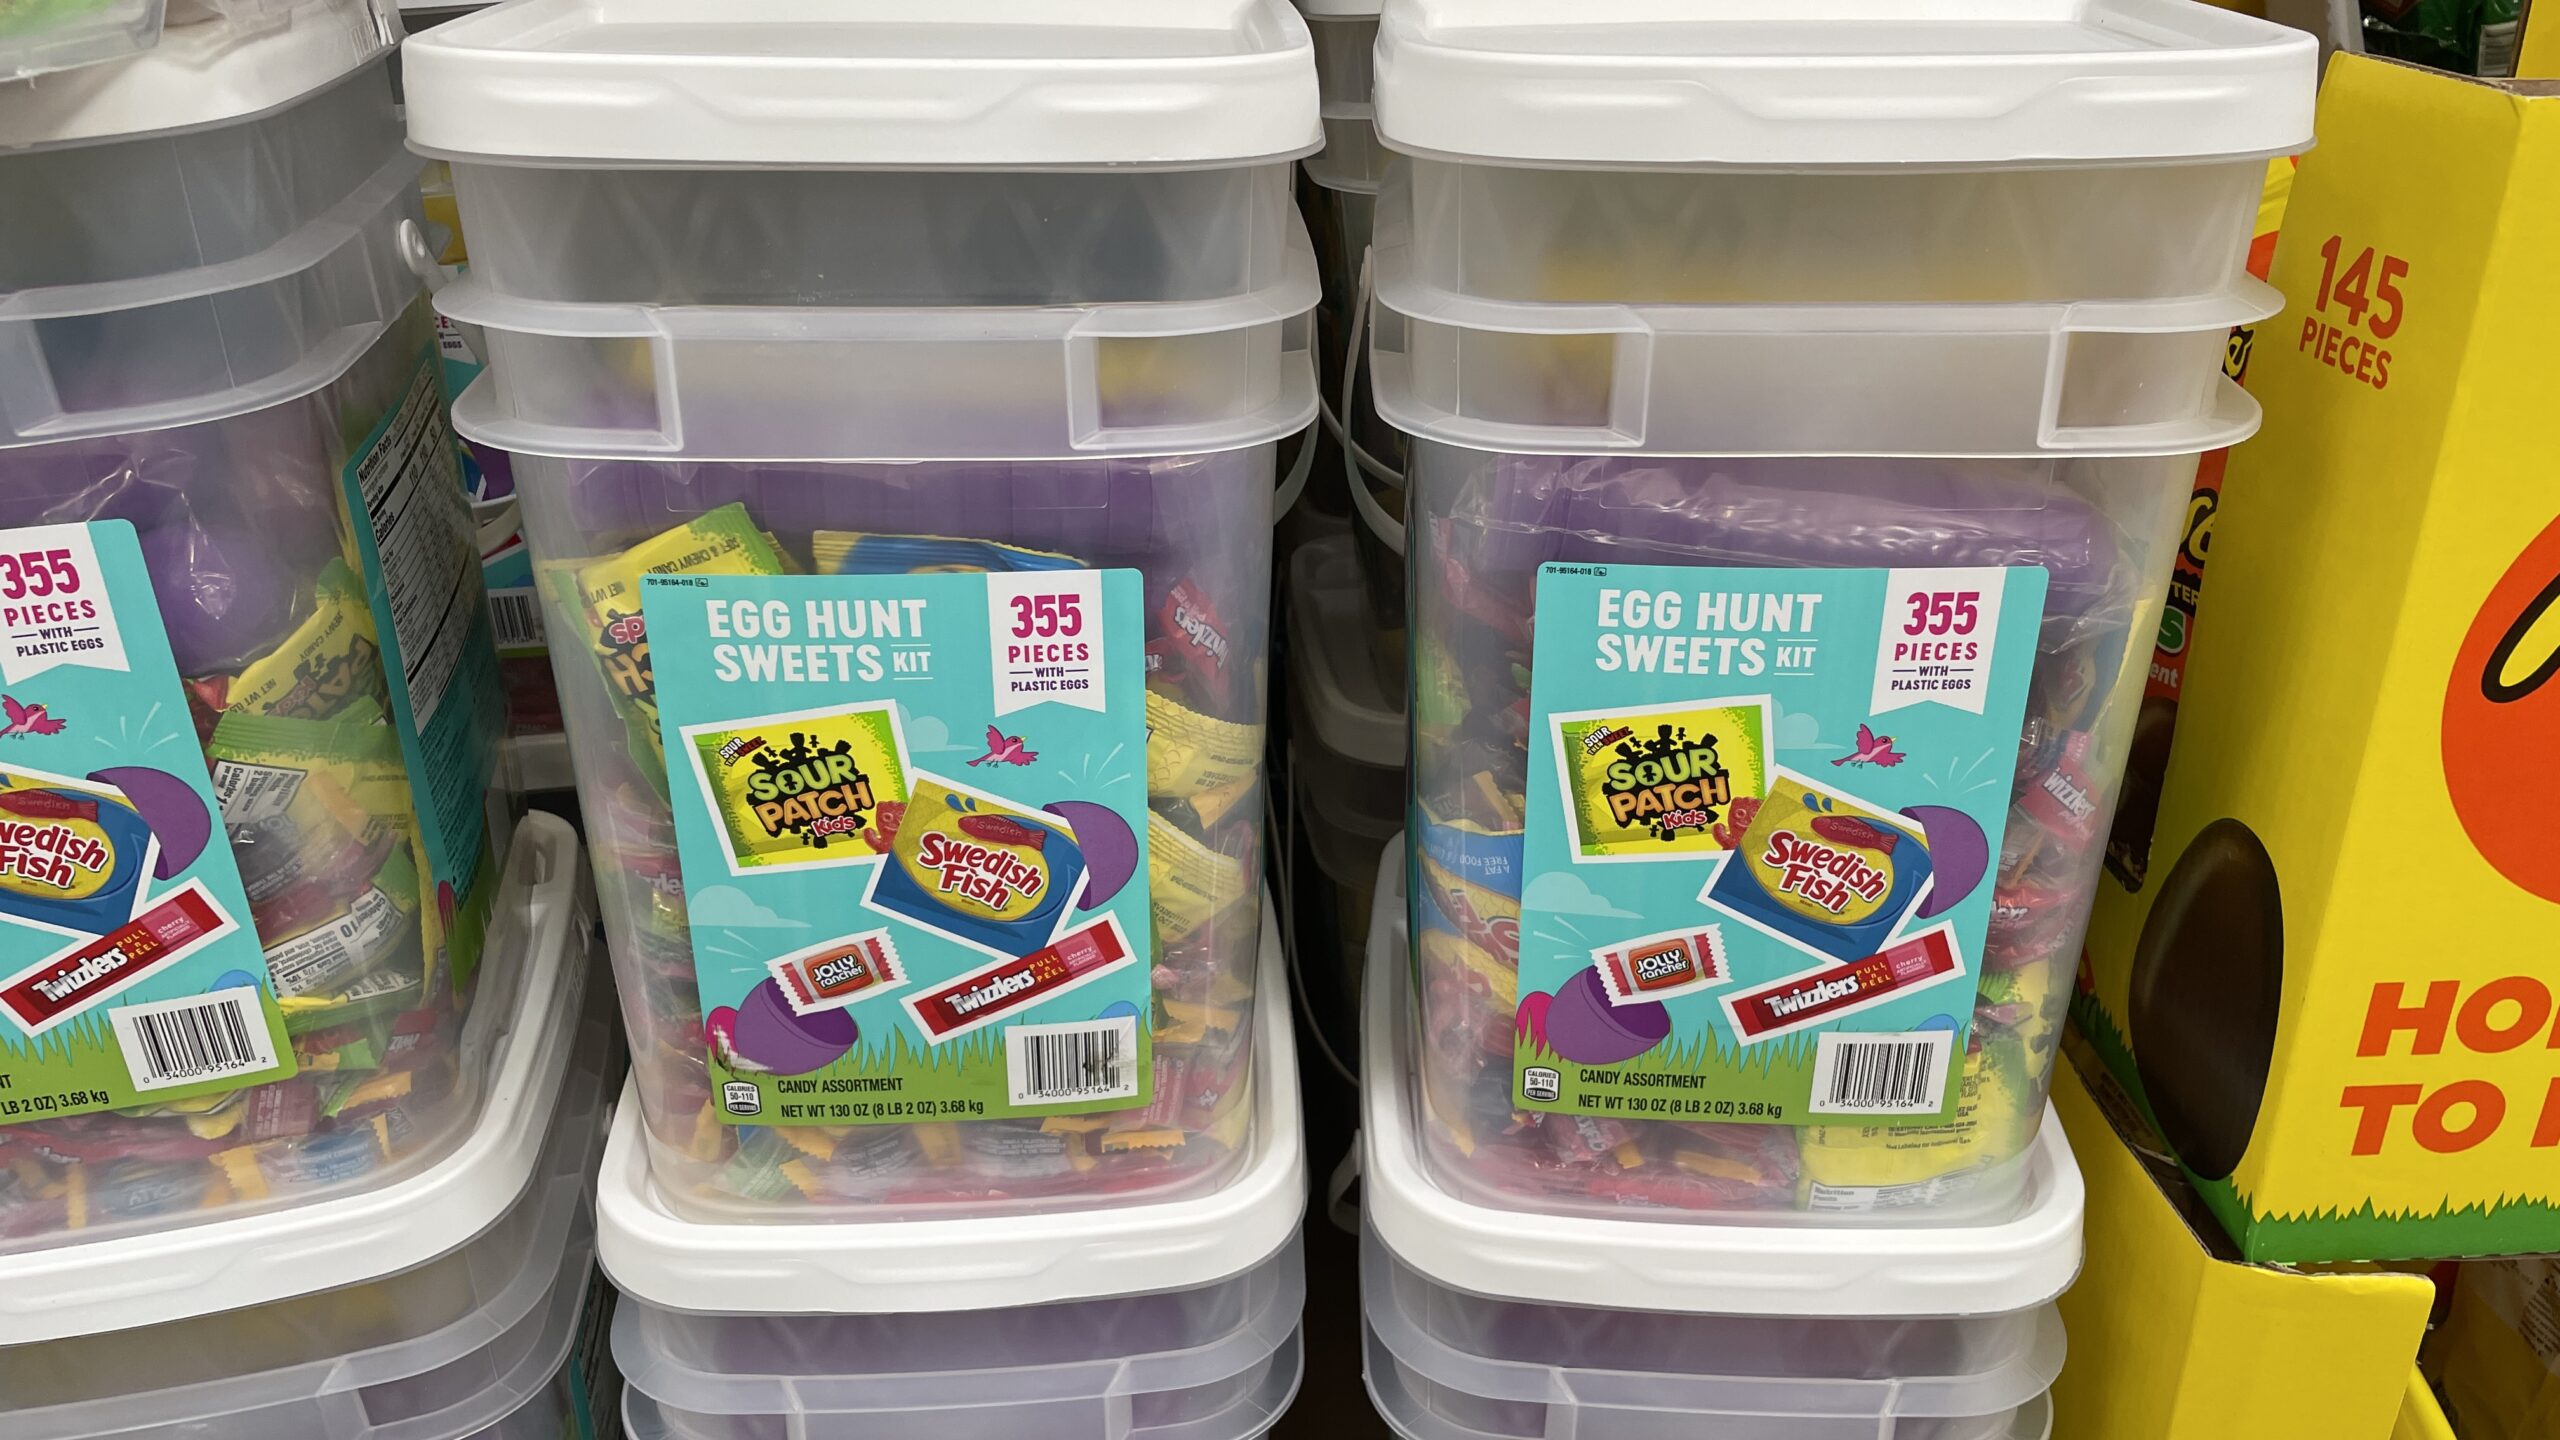 Sam’s Club is Selling A Giant Bucket Filled with Candy and Plastic Eggs for Your Egg Hunt